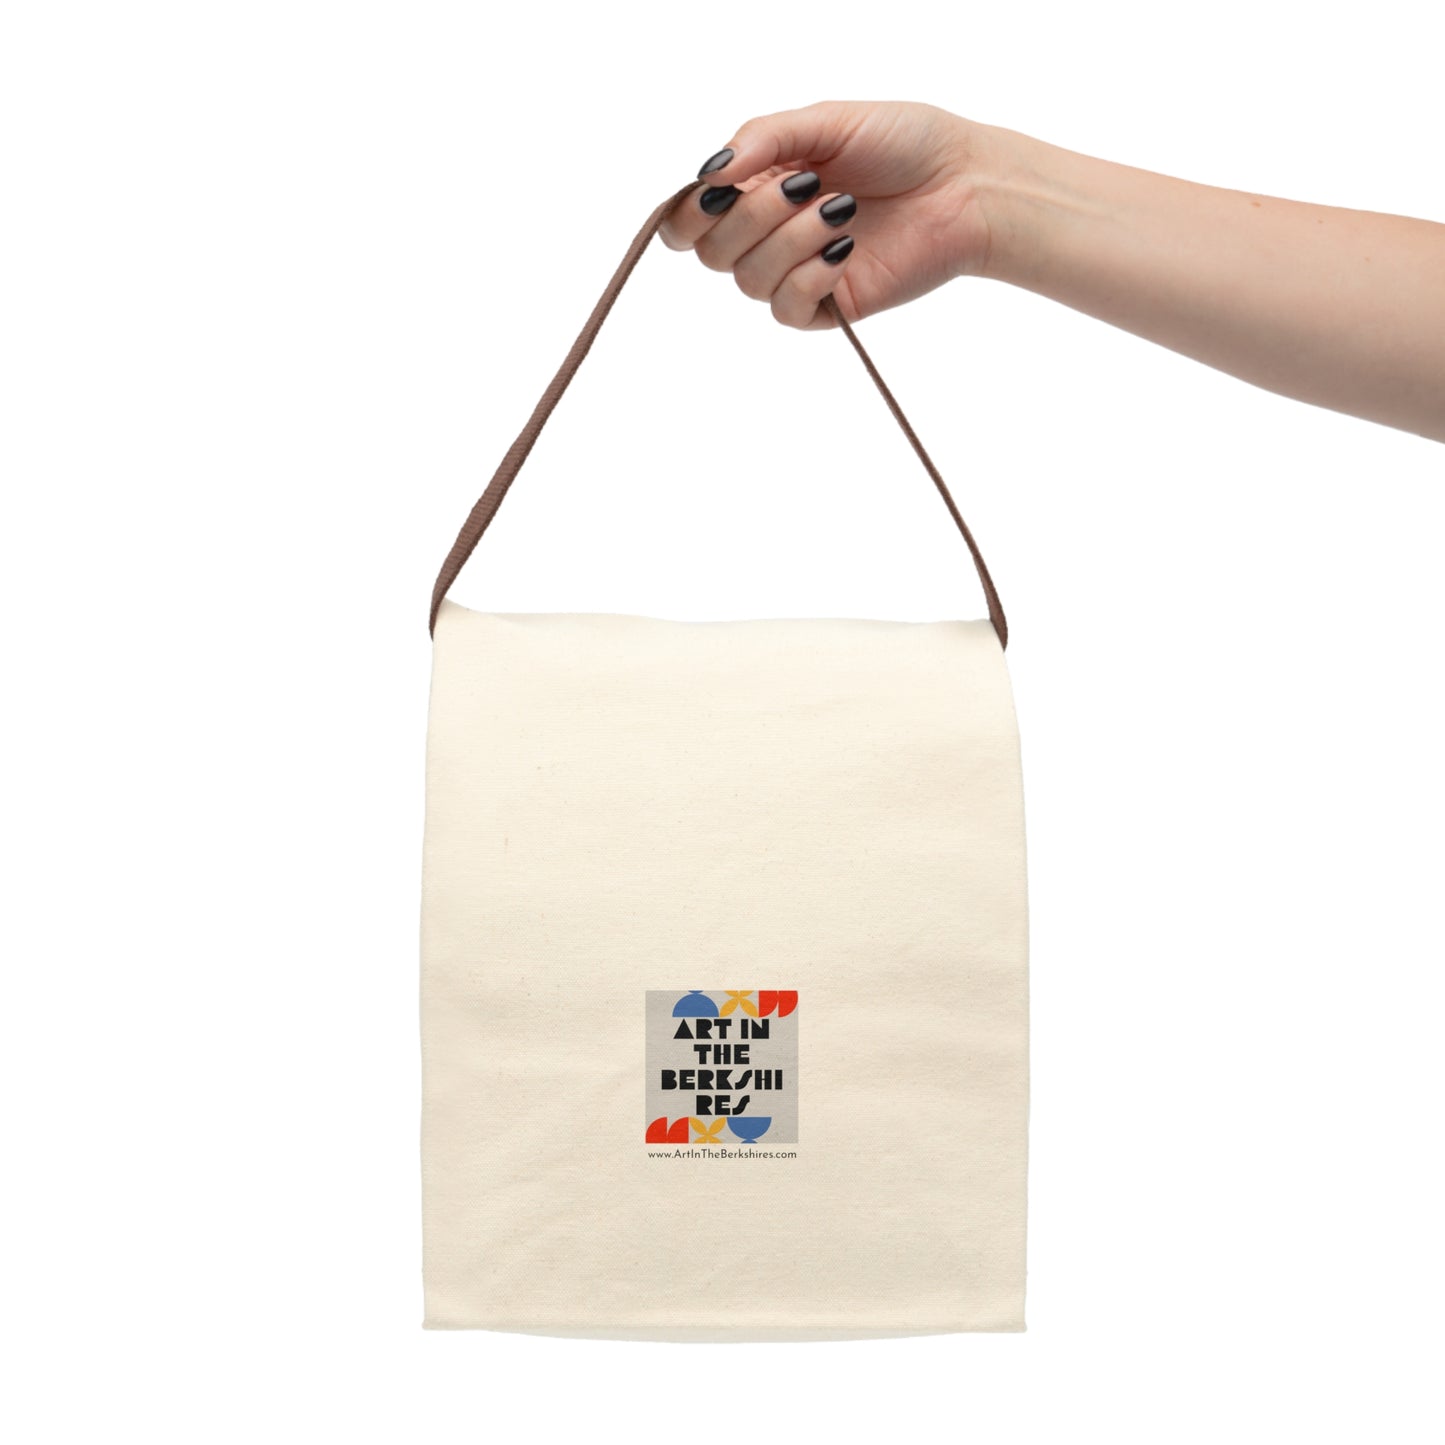 AITB Lunch Bag made of Cotton Canvas